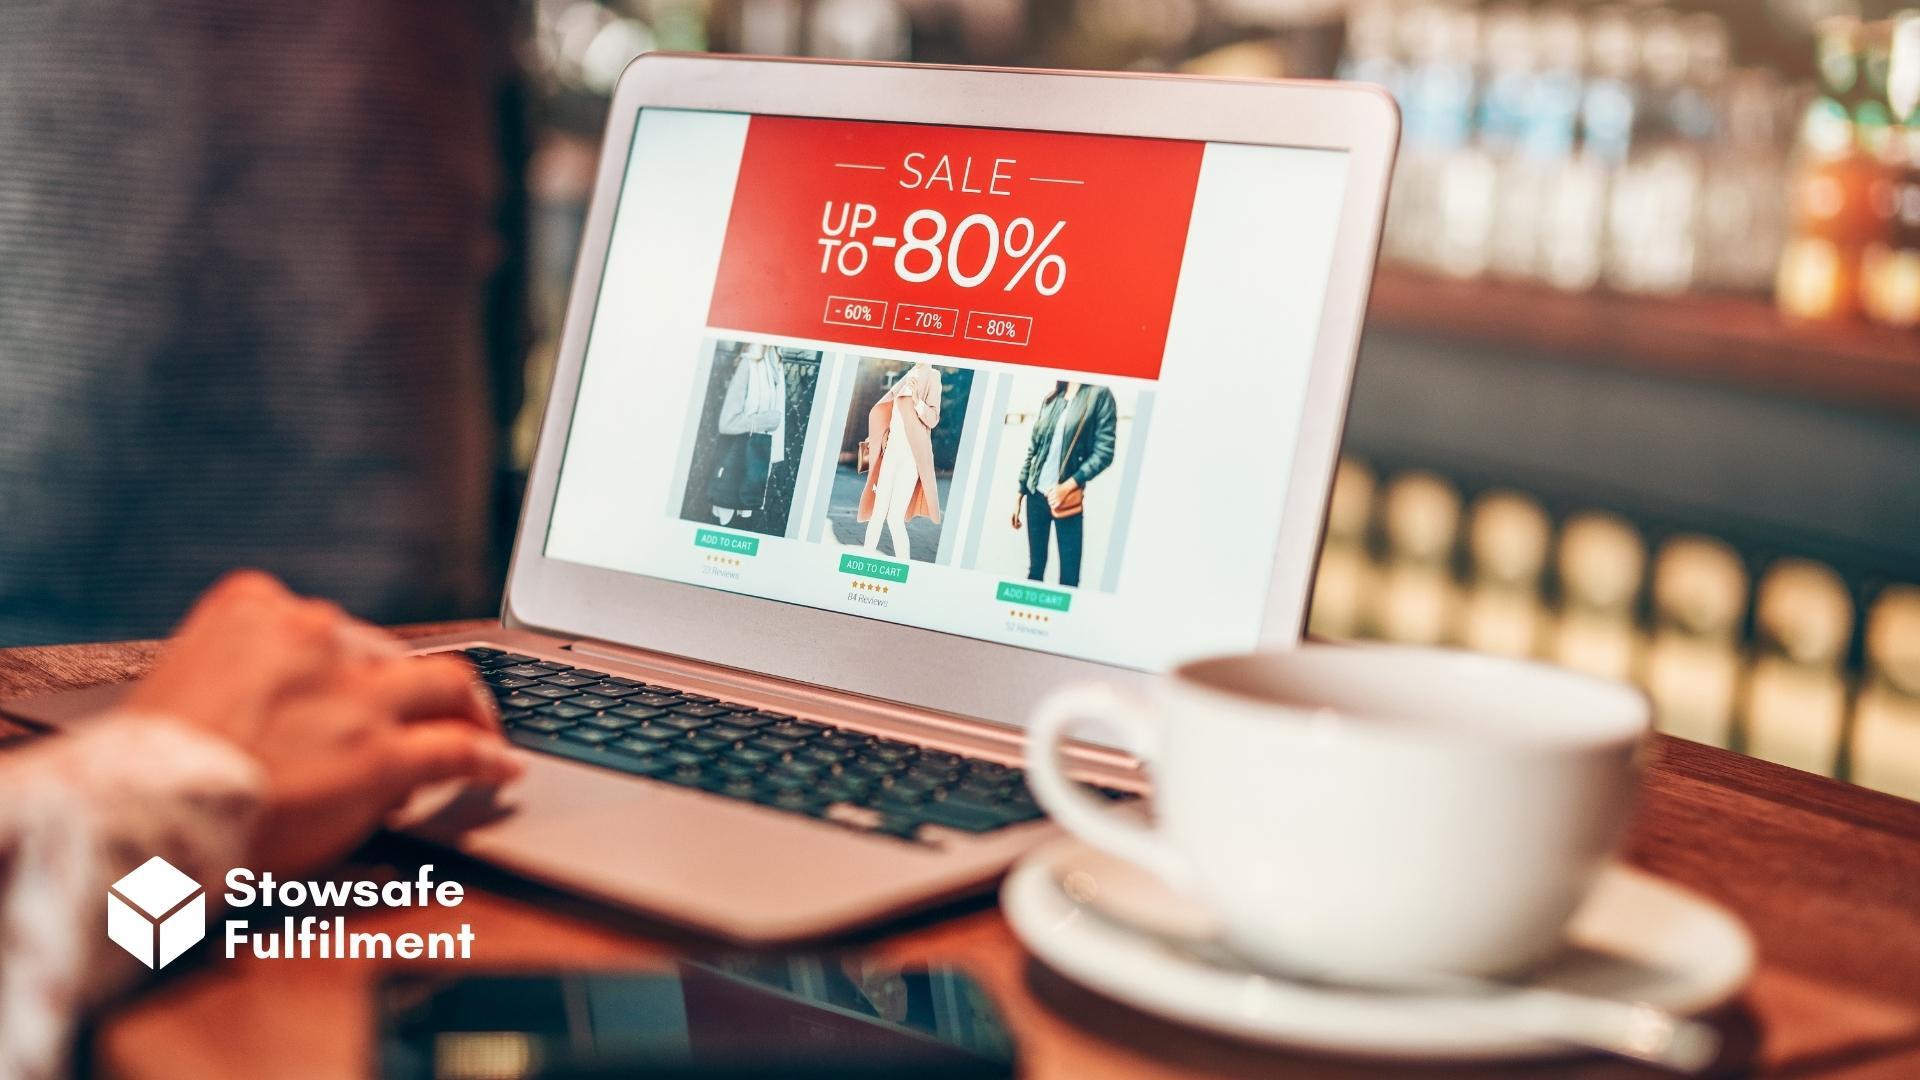 Running an eCommerce fashion business? You'll know how time-consuming fulfilment can be. Learn how a 3PL can help you save time and grow online.